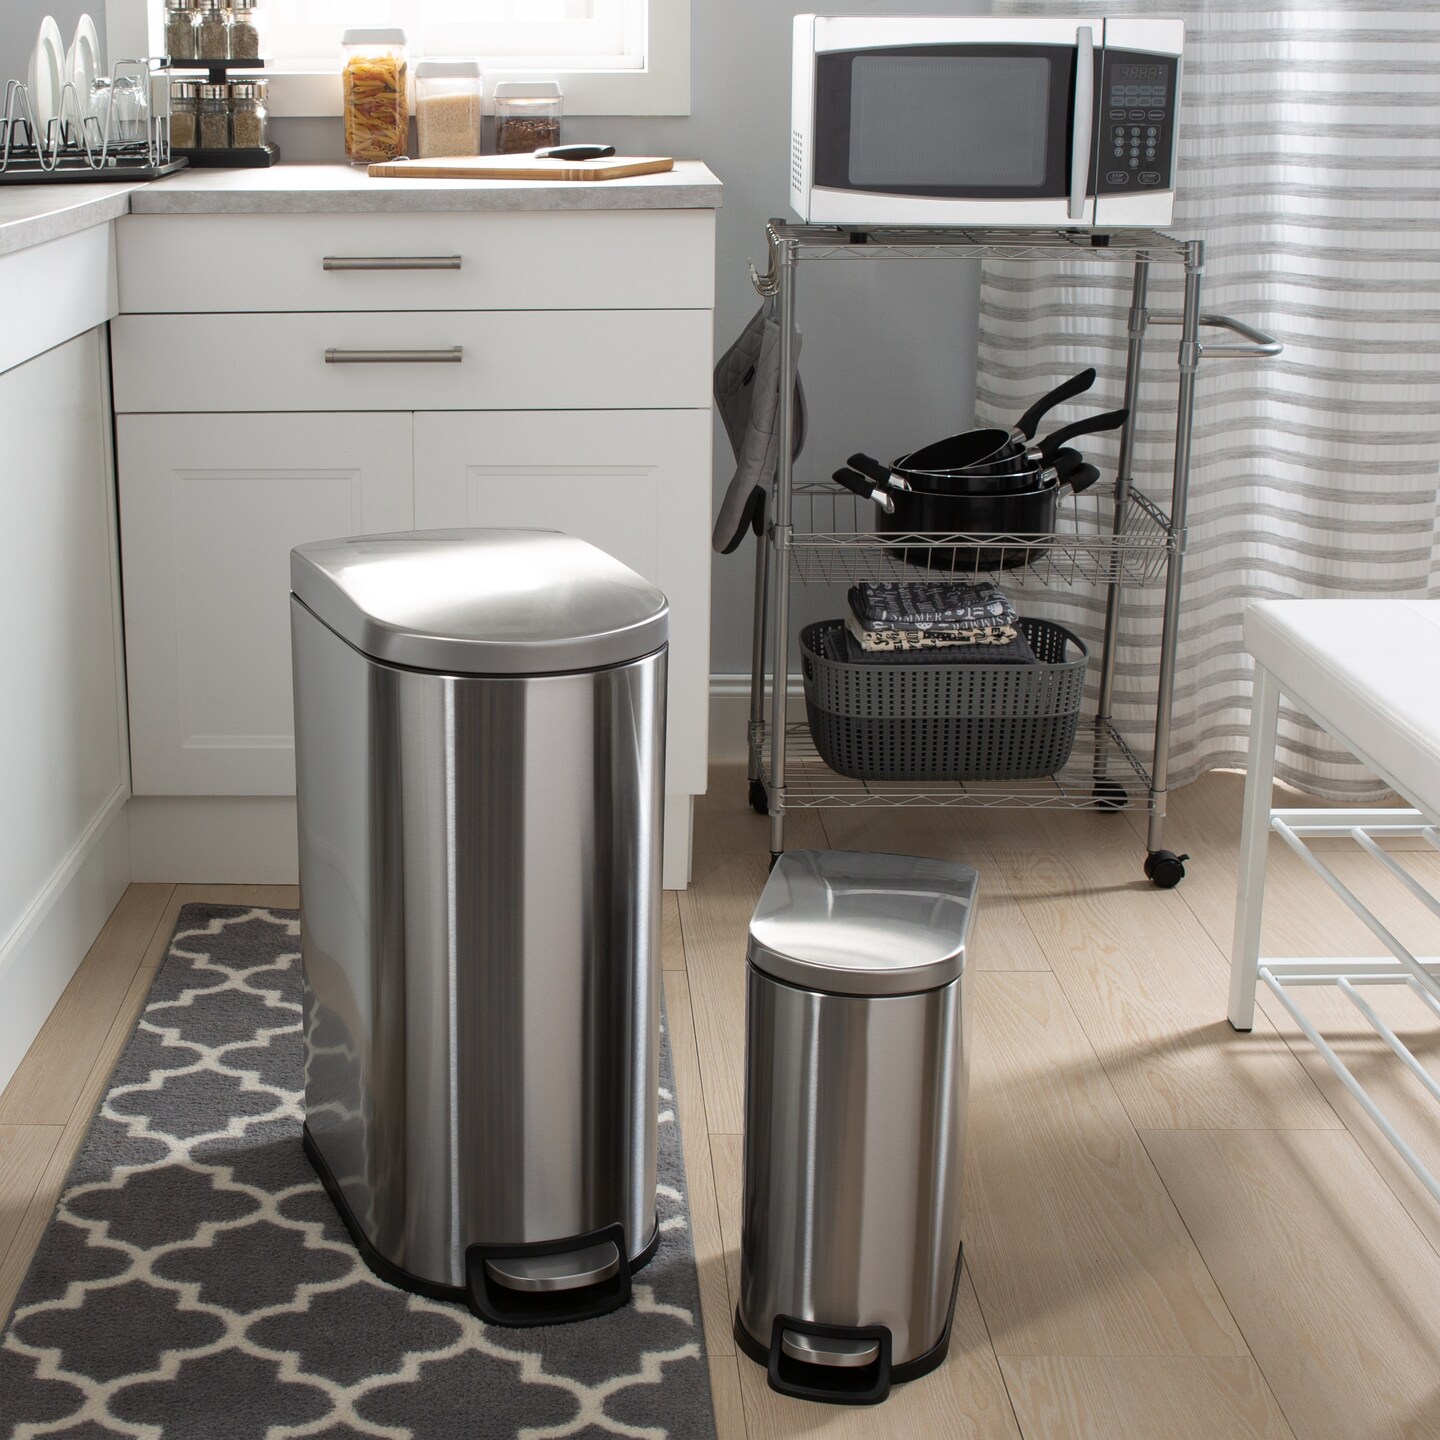 Set of Silver kitchen trash cans